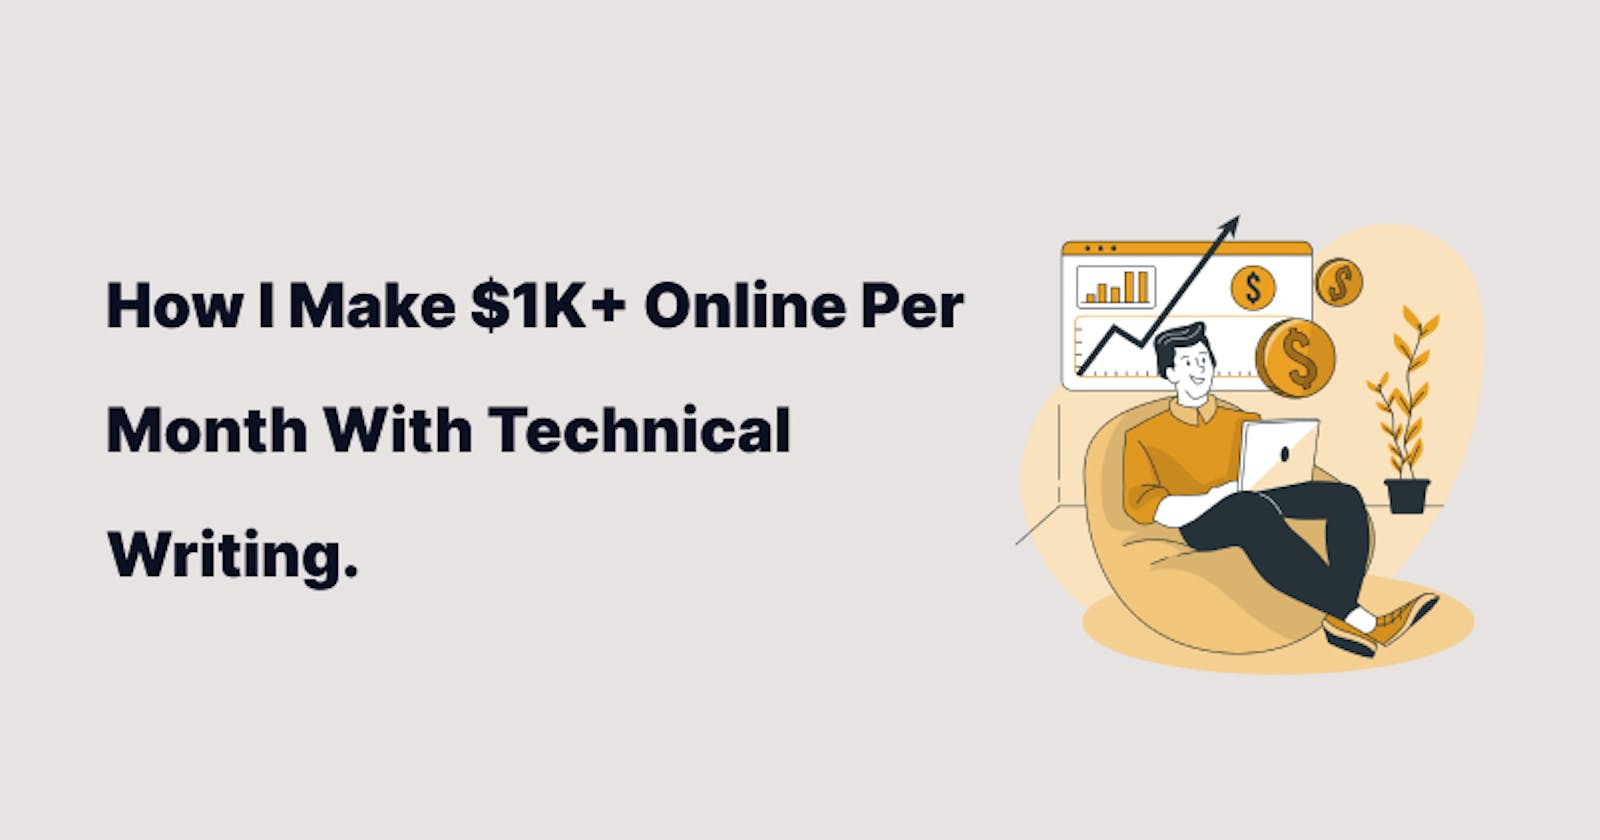 How I Make $1K+ Online Per Month With Technical Writing